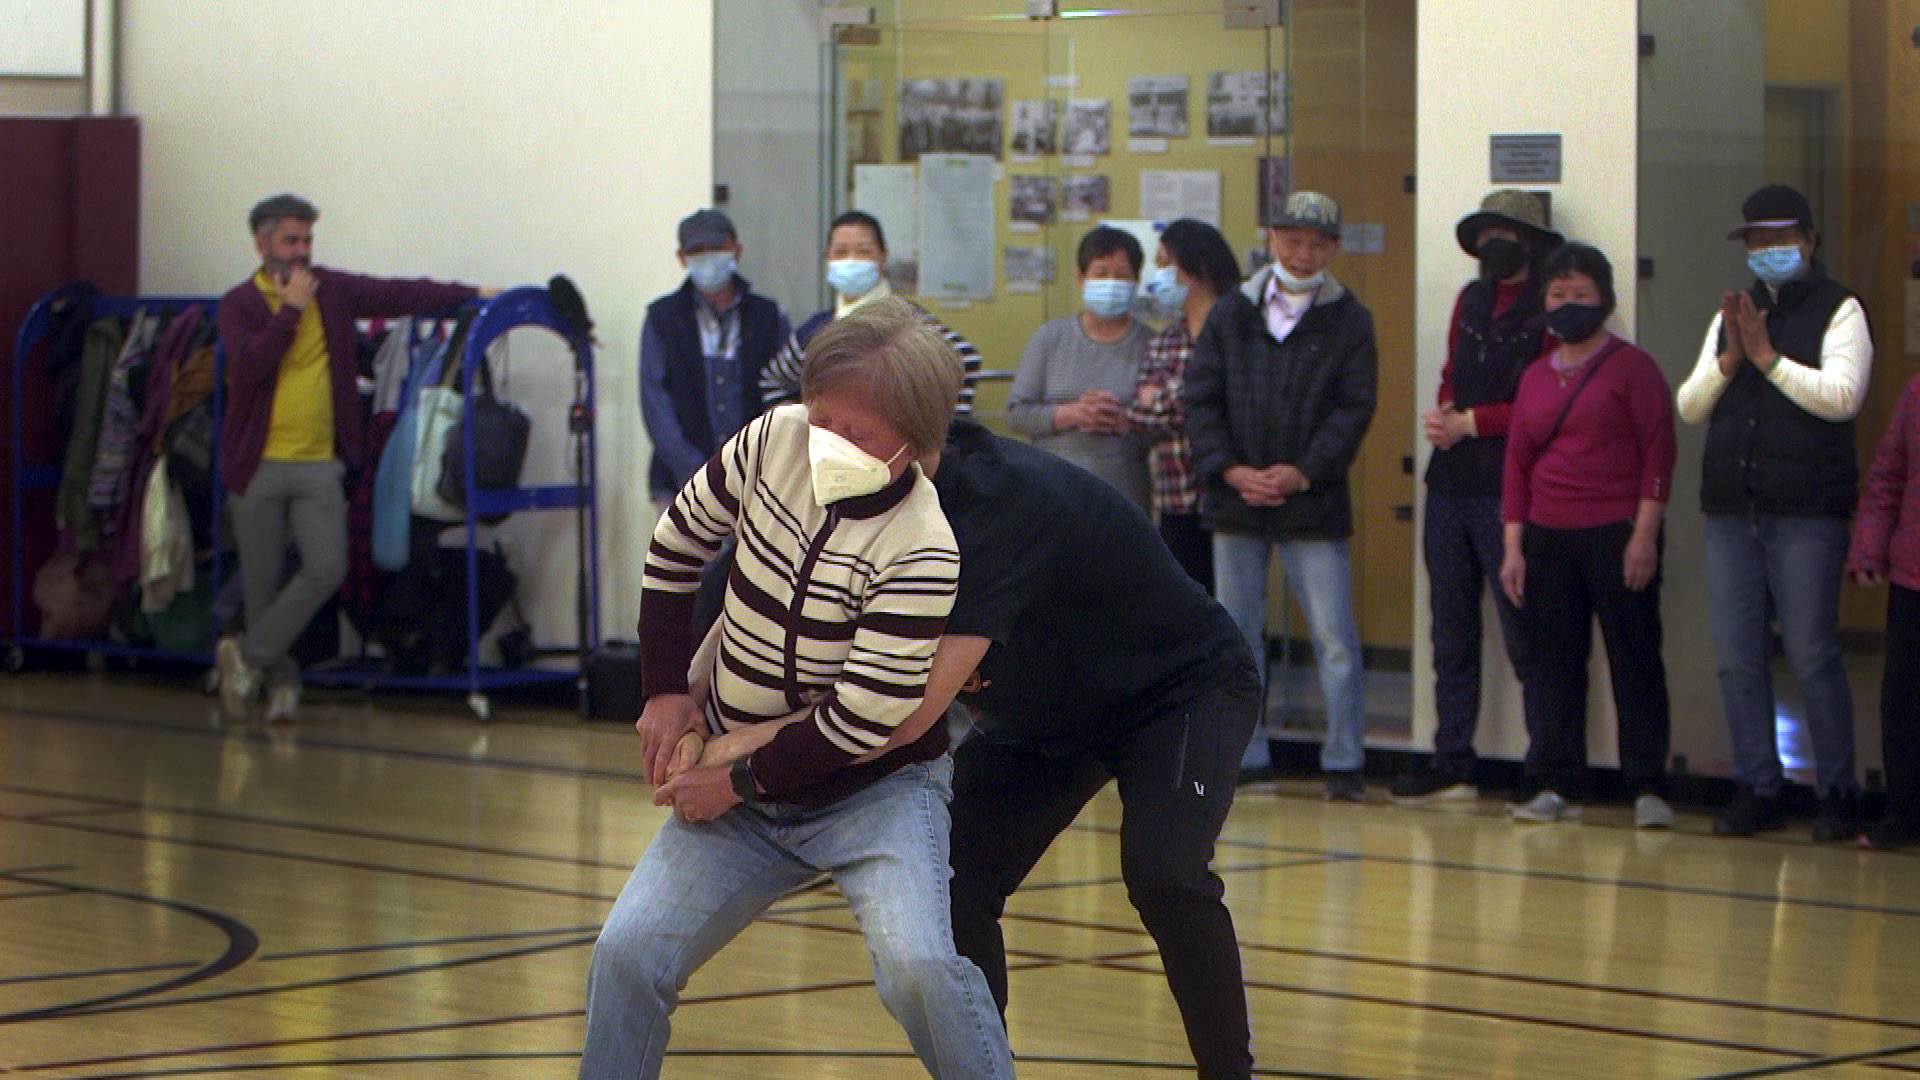 Hudson Liao teaches a senior citizen to break the grip of an attacker during a recent class in the Chinatown YMCA.